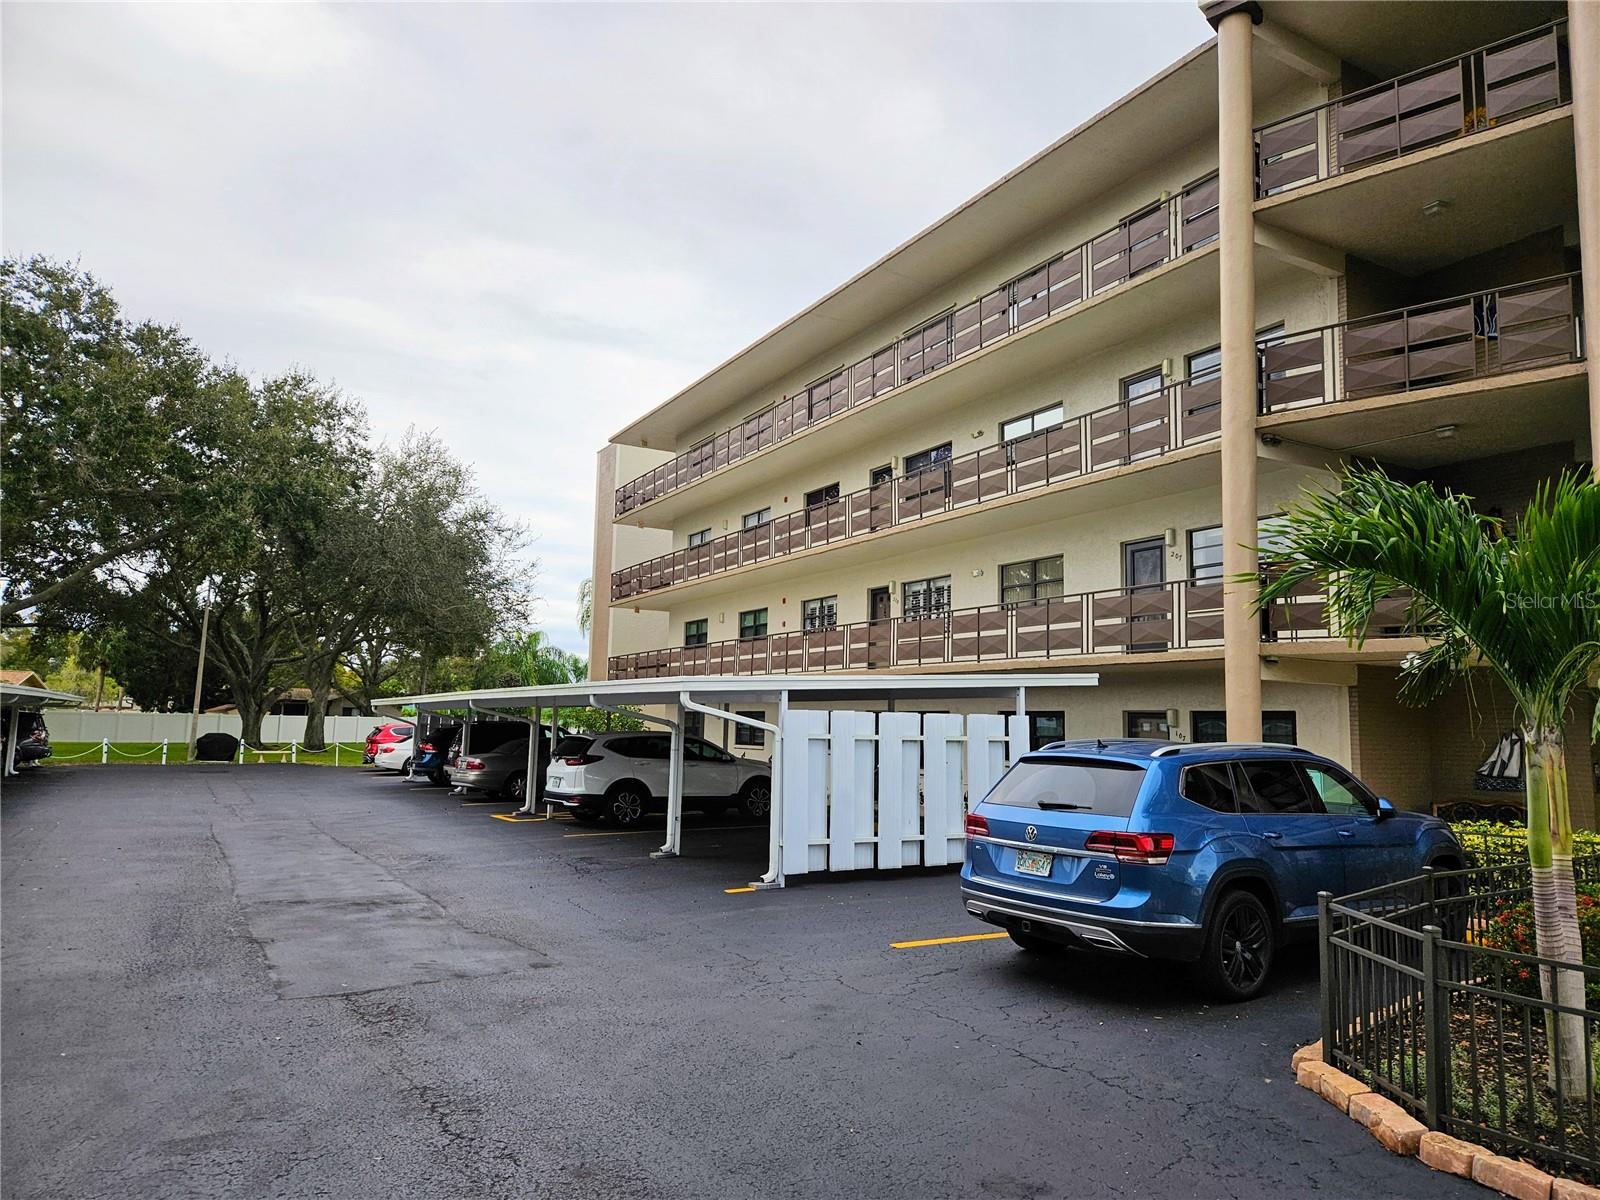 Condo Unit Comes With Carport Just in Front of the Unit